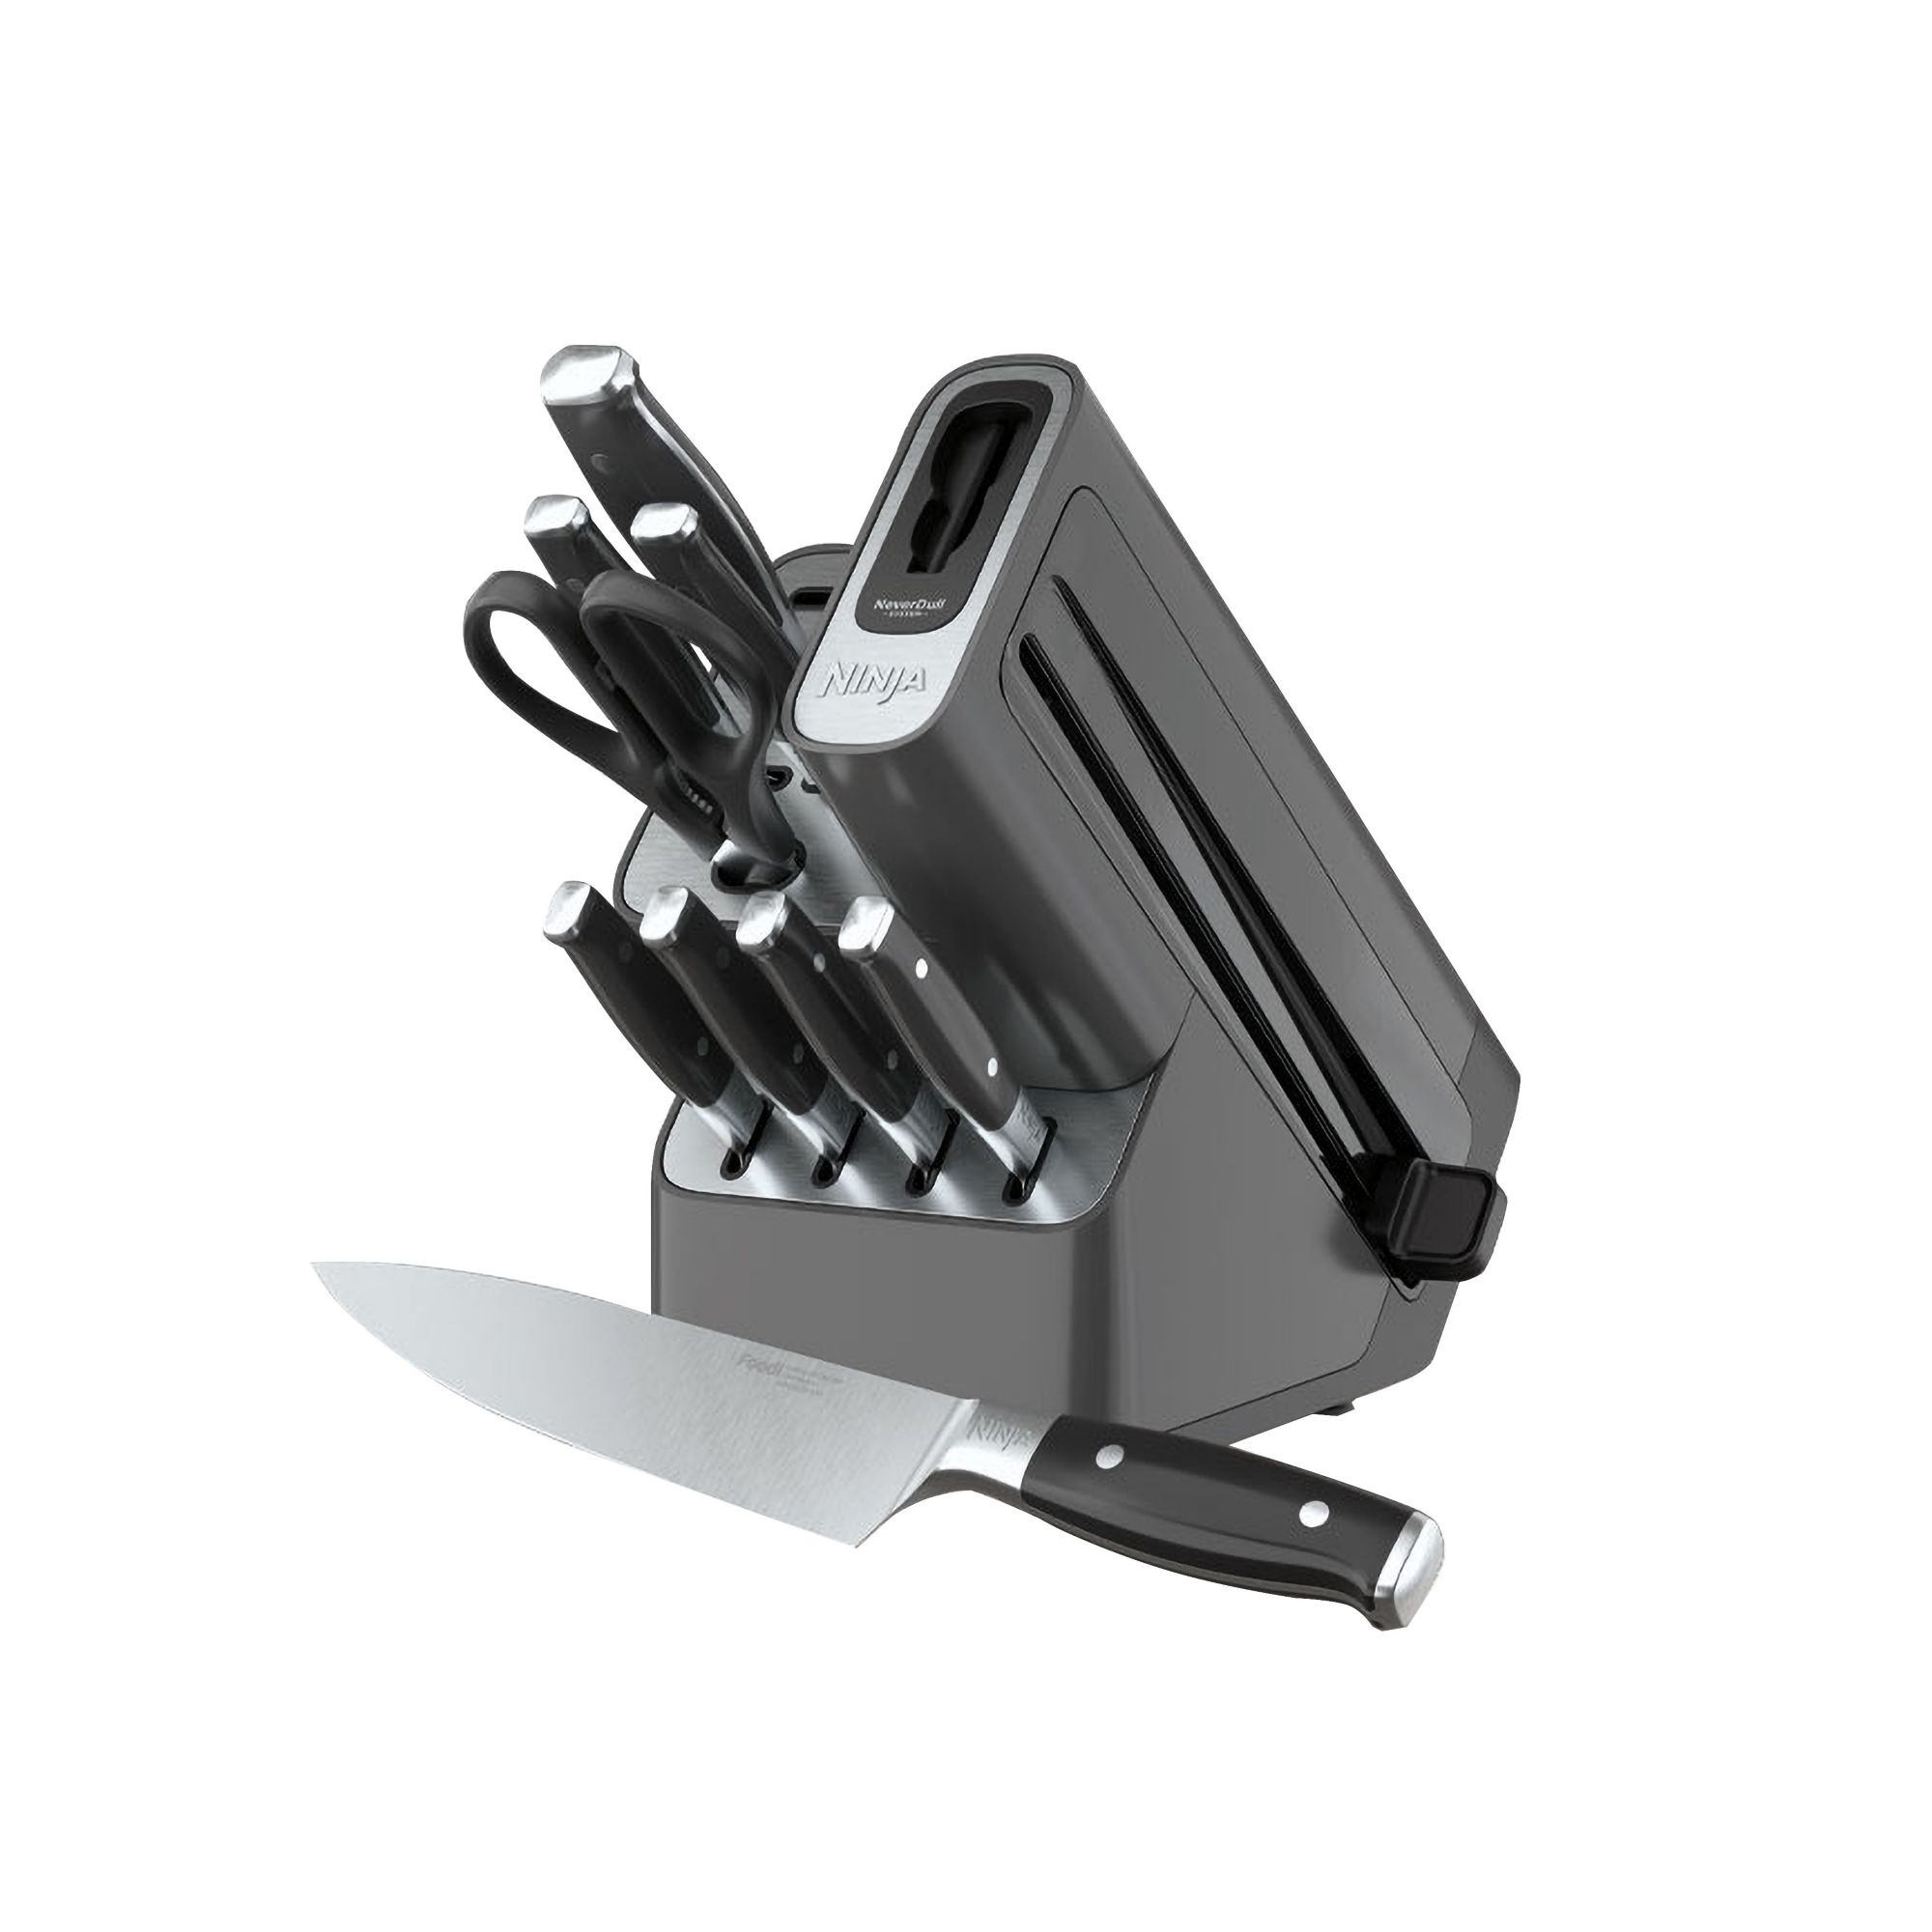 Gift Ninja's 9-piece Foodi NeverDull knife block set while it's down at the  $130 low (Reg. $200)